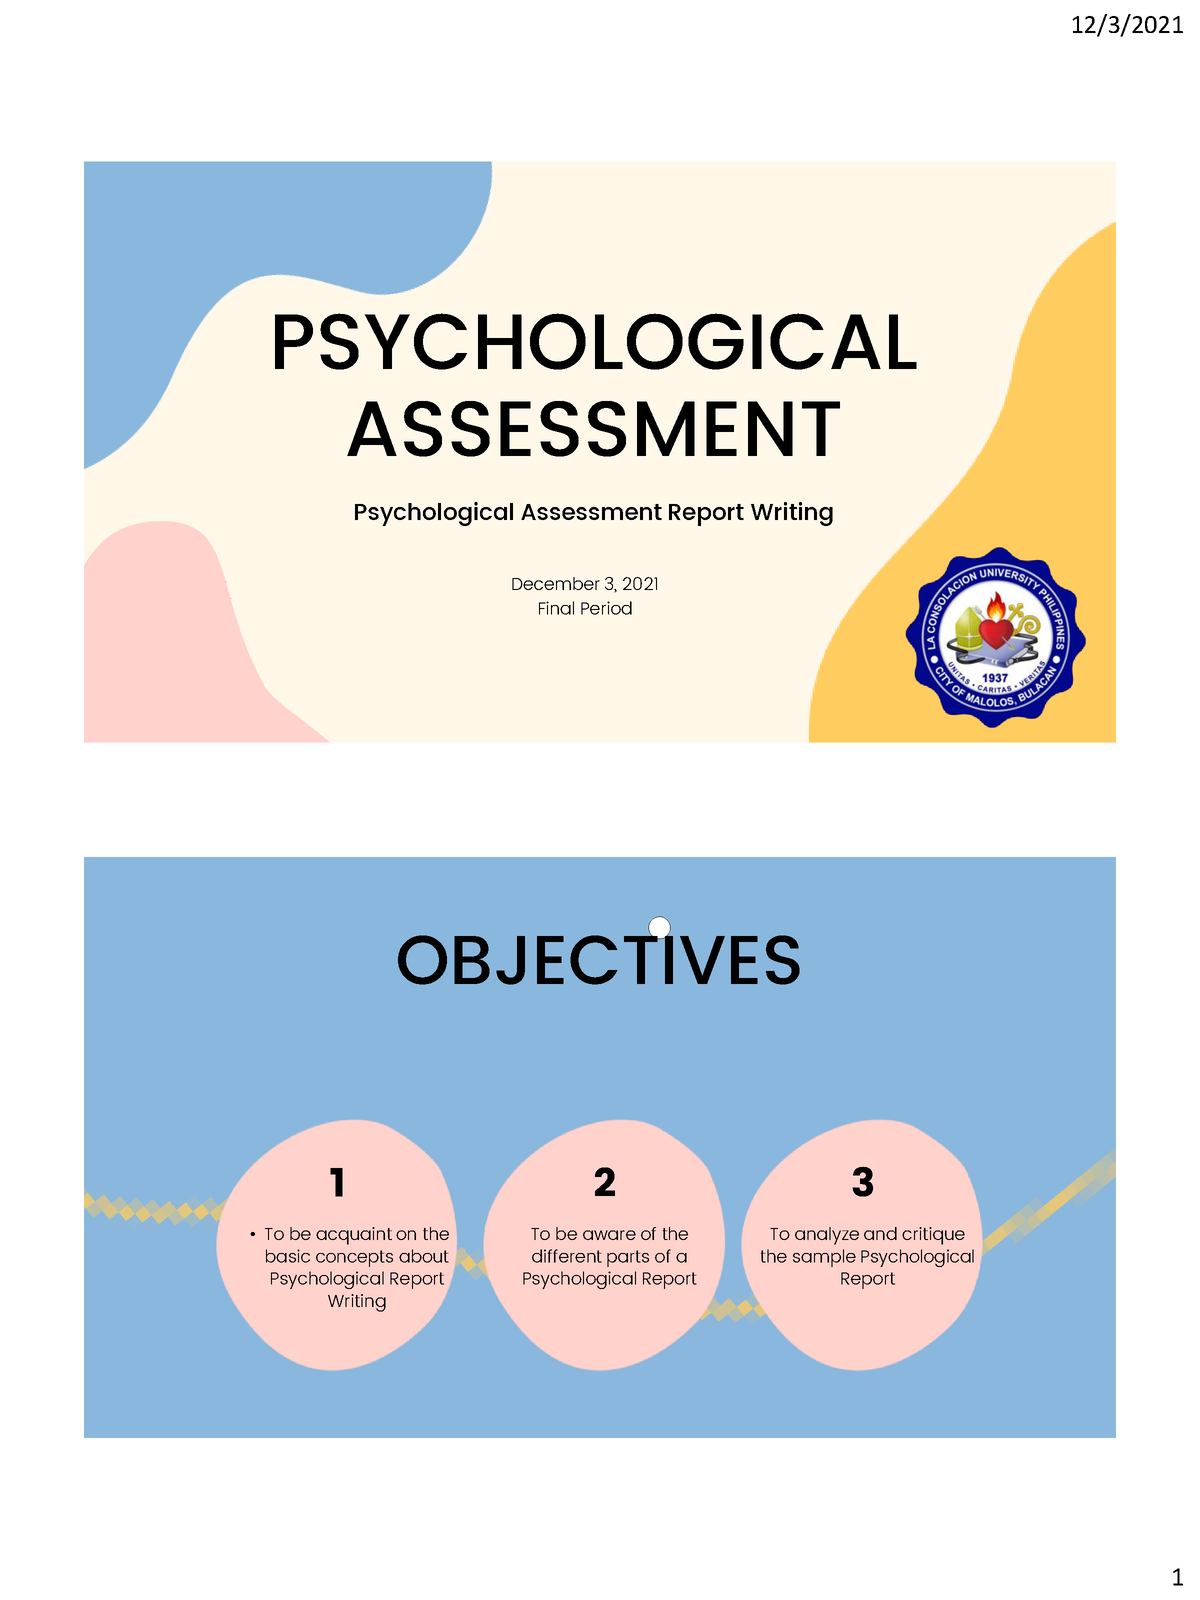 How to Write Psychological Assessment Report - PSYCHOLOGICAL ASSESSMENT ...